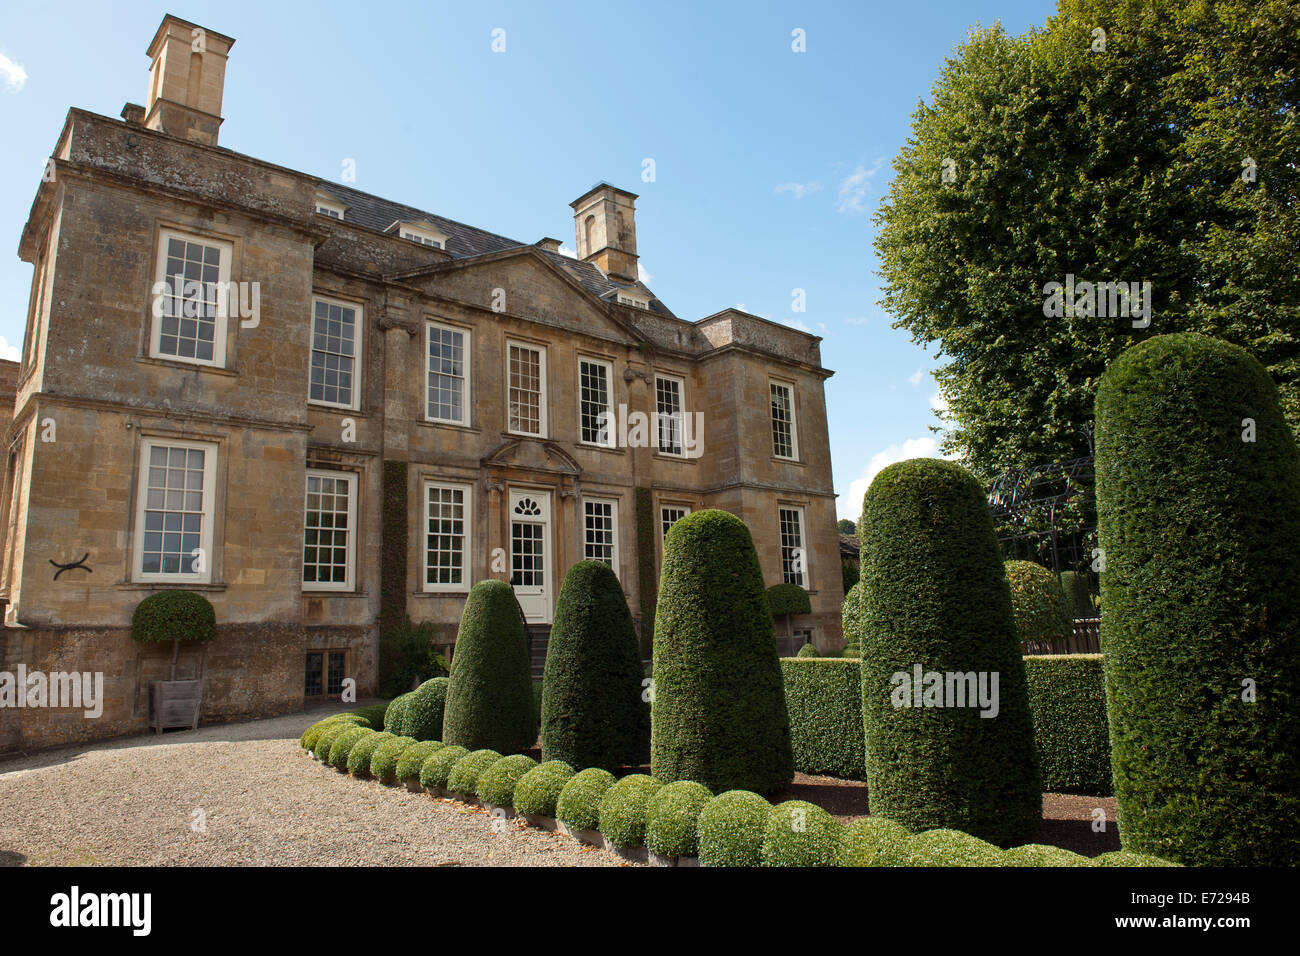 Bourton House, Bourton on the Hill, Gloucestershire, Angleterre, Royaume-Uni. Banque D'Images